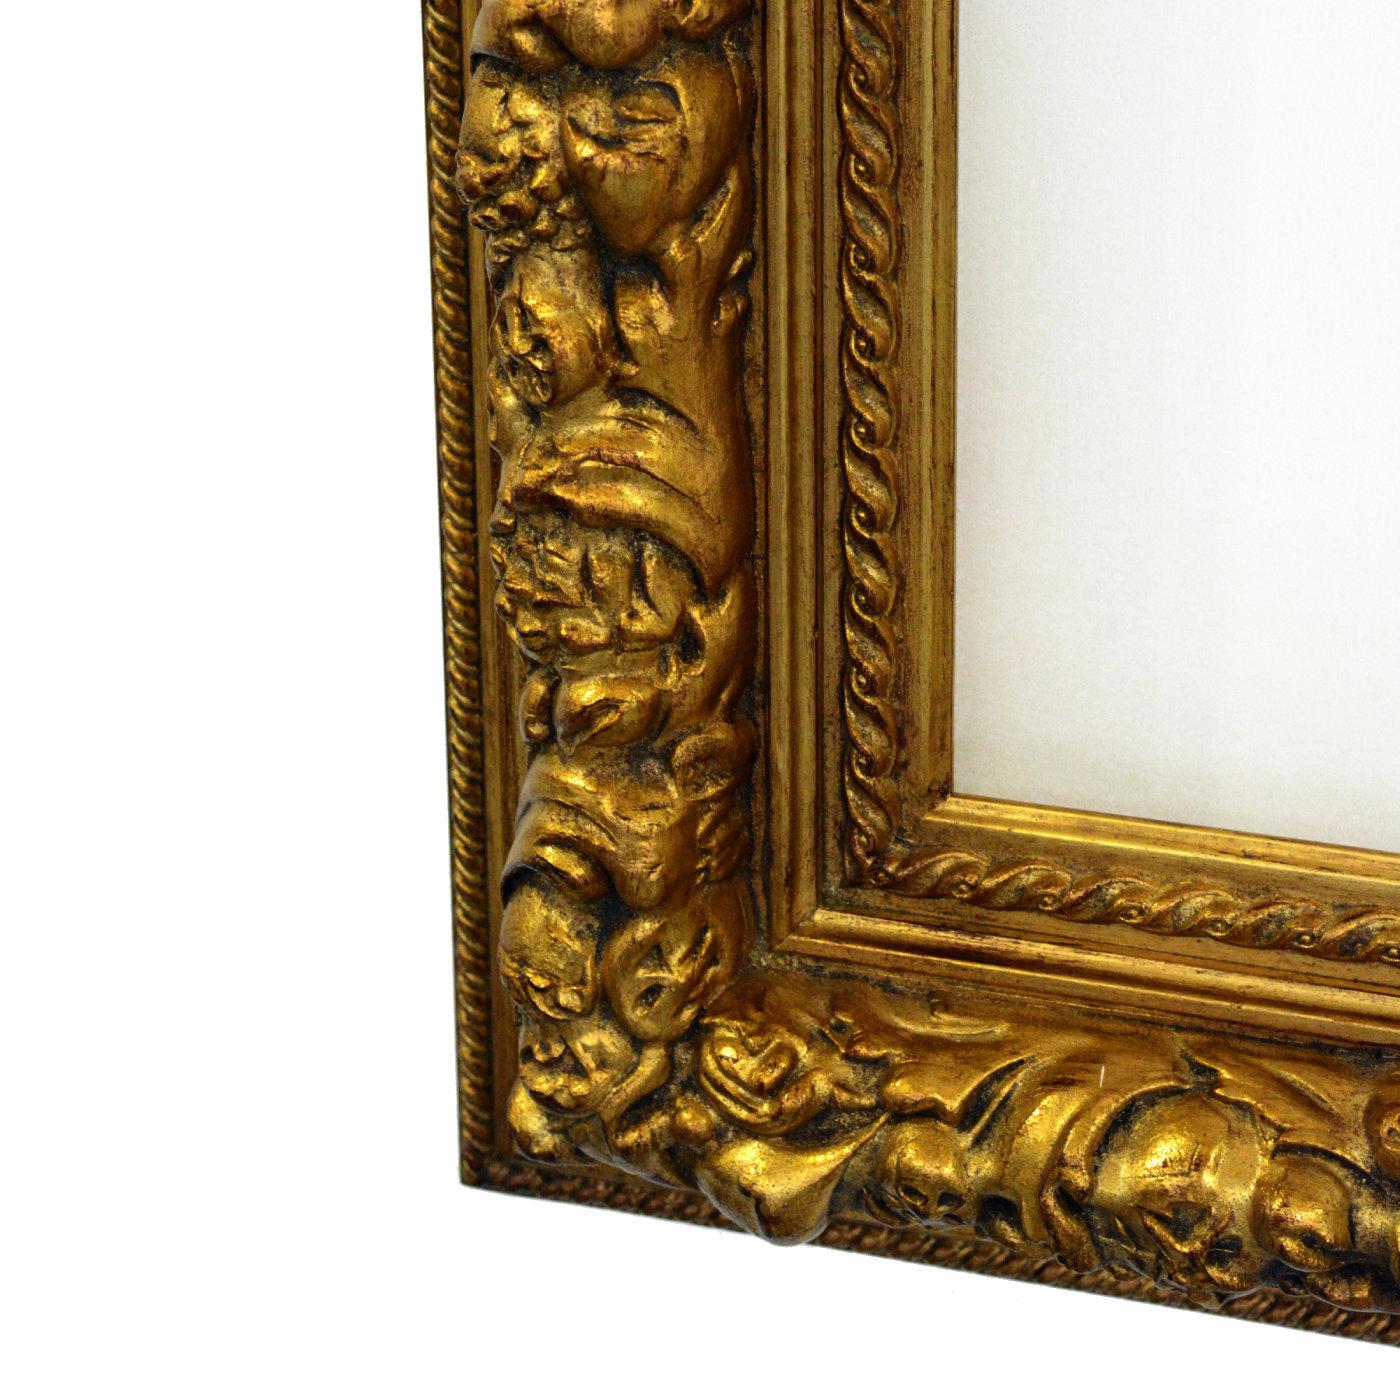 A meticulous and refined work of art by master woodworkers, this magnificent frame boasts a bold Baroque-inspired design entirely crafted and engraved by hand. Glazed with mesmerizing gold leaf, this piece will be a sumptuous and charming addition